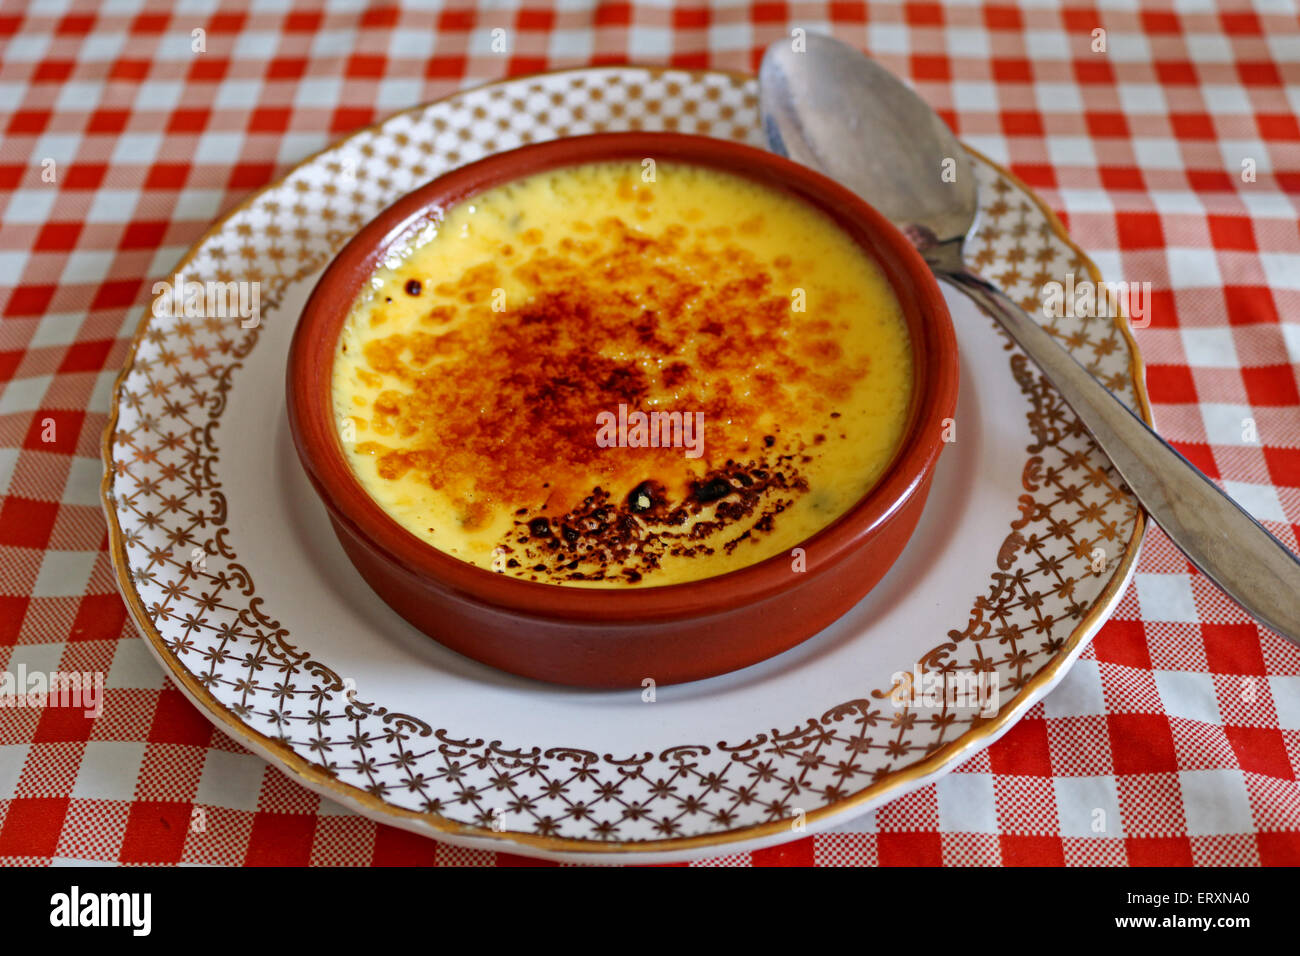 creme brulee on gingham table Stock Photo